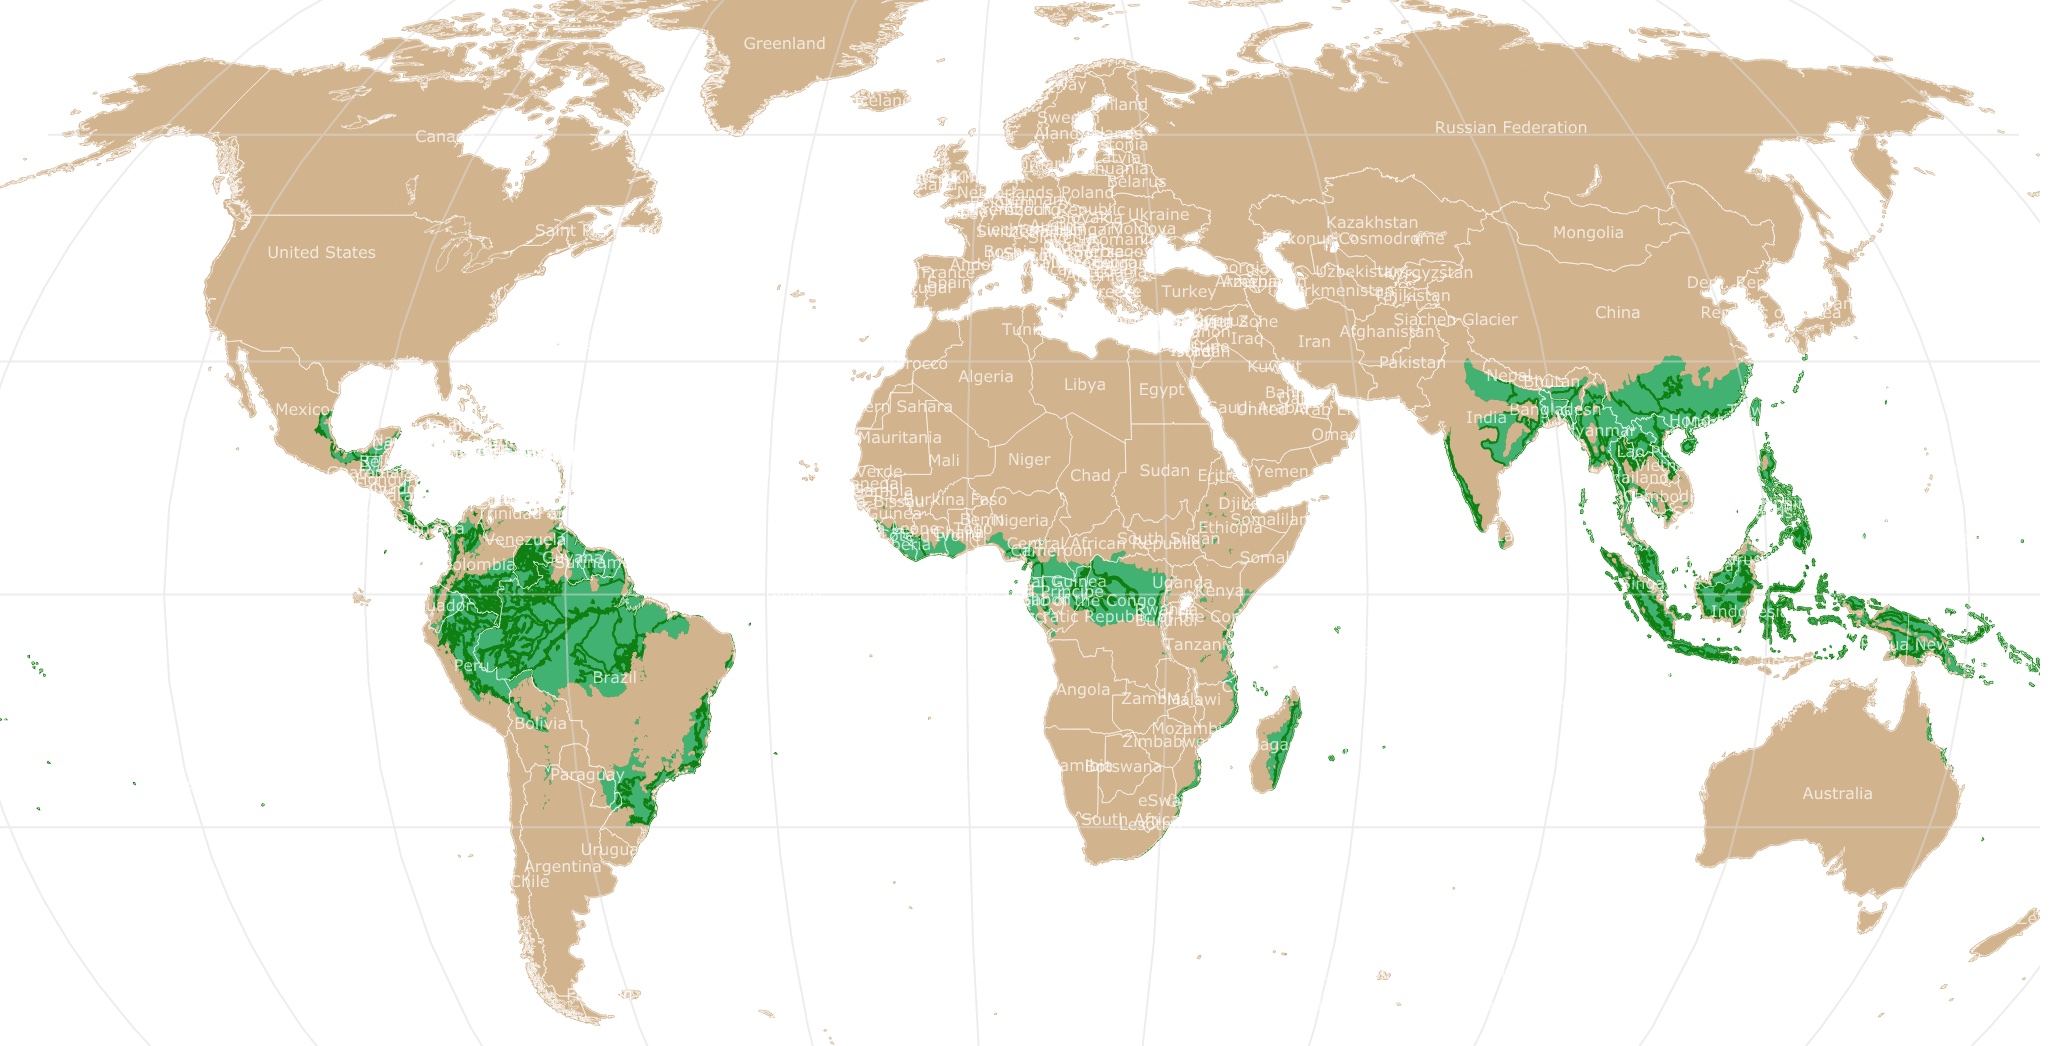 Tropical Forest ecoregions map